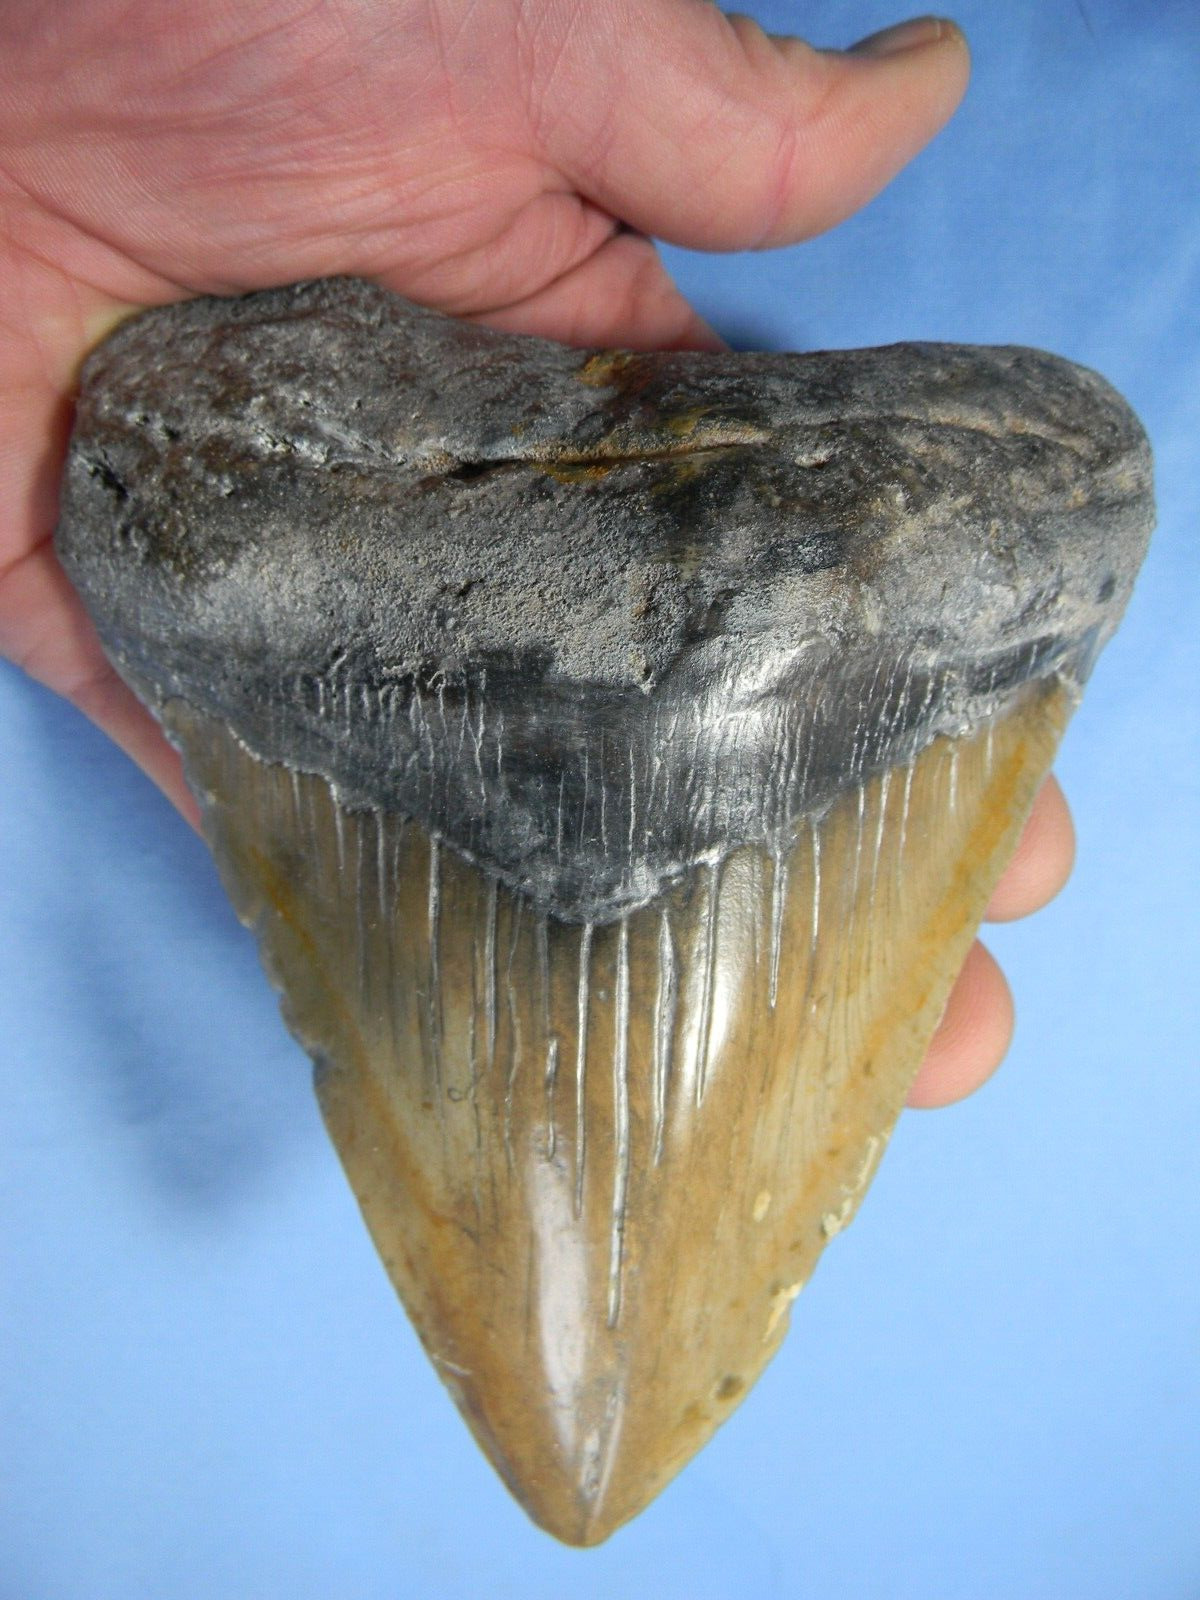 VERY LARGE  5 5/16  INCH  MEGALODON SHARK TOOTH FOSSIL